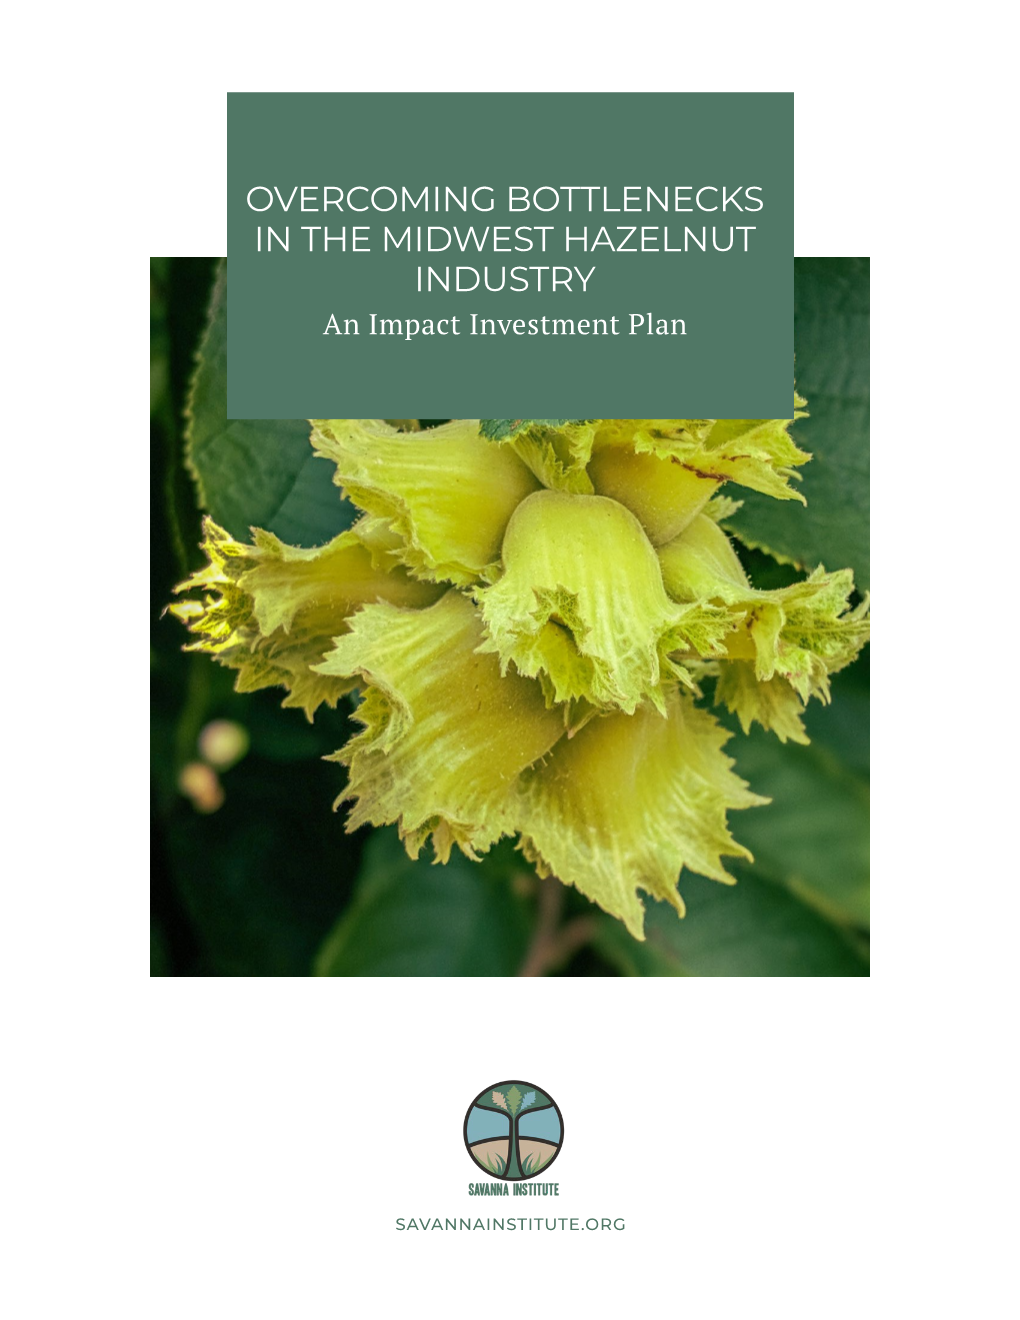 OVERCOMING BOTTLENECKS in the MIDWEST HAZELNUT INDUSTRY an Impact Investment Plan